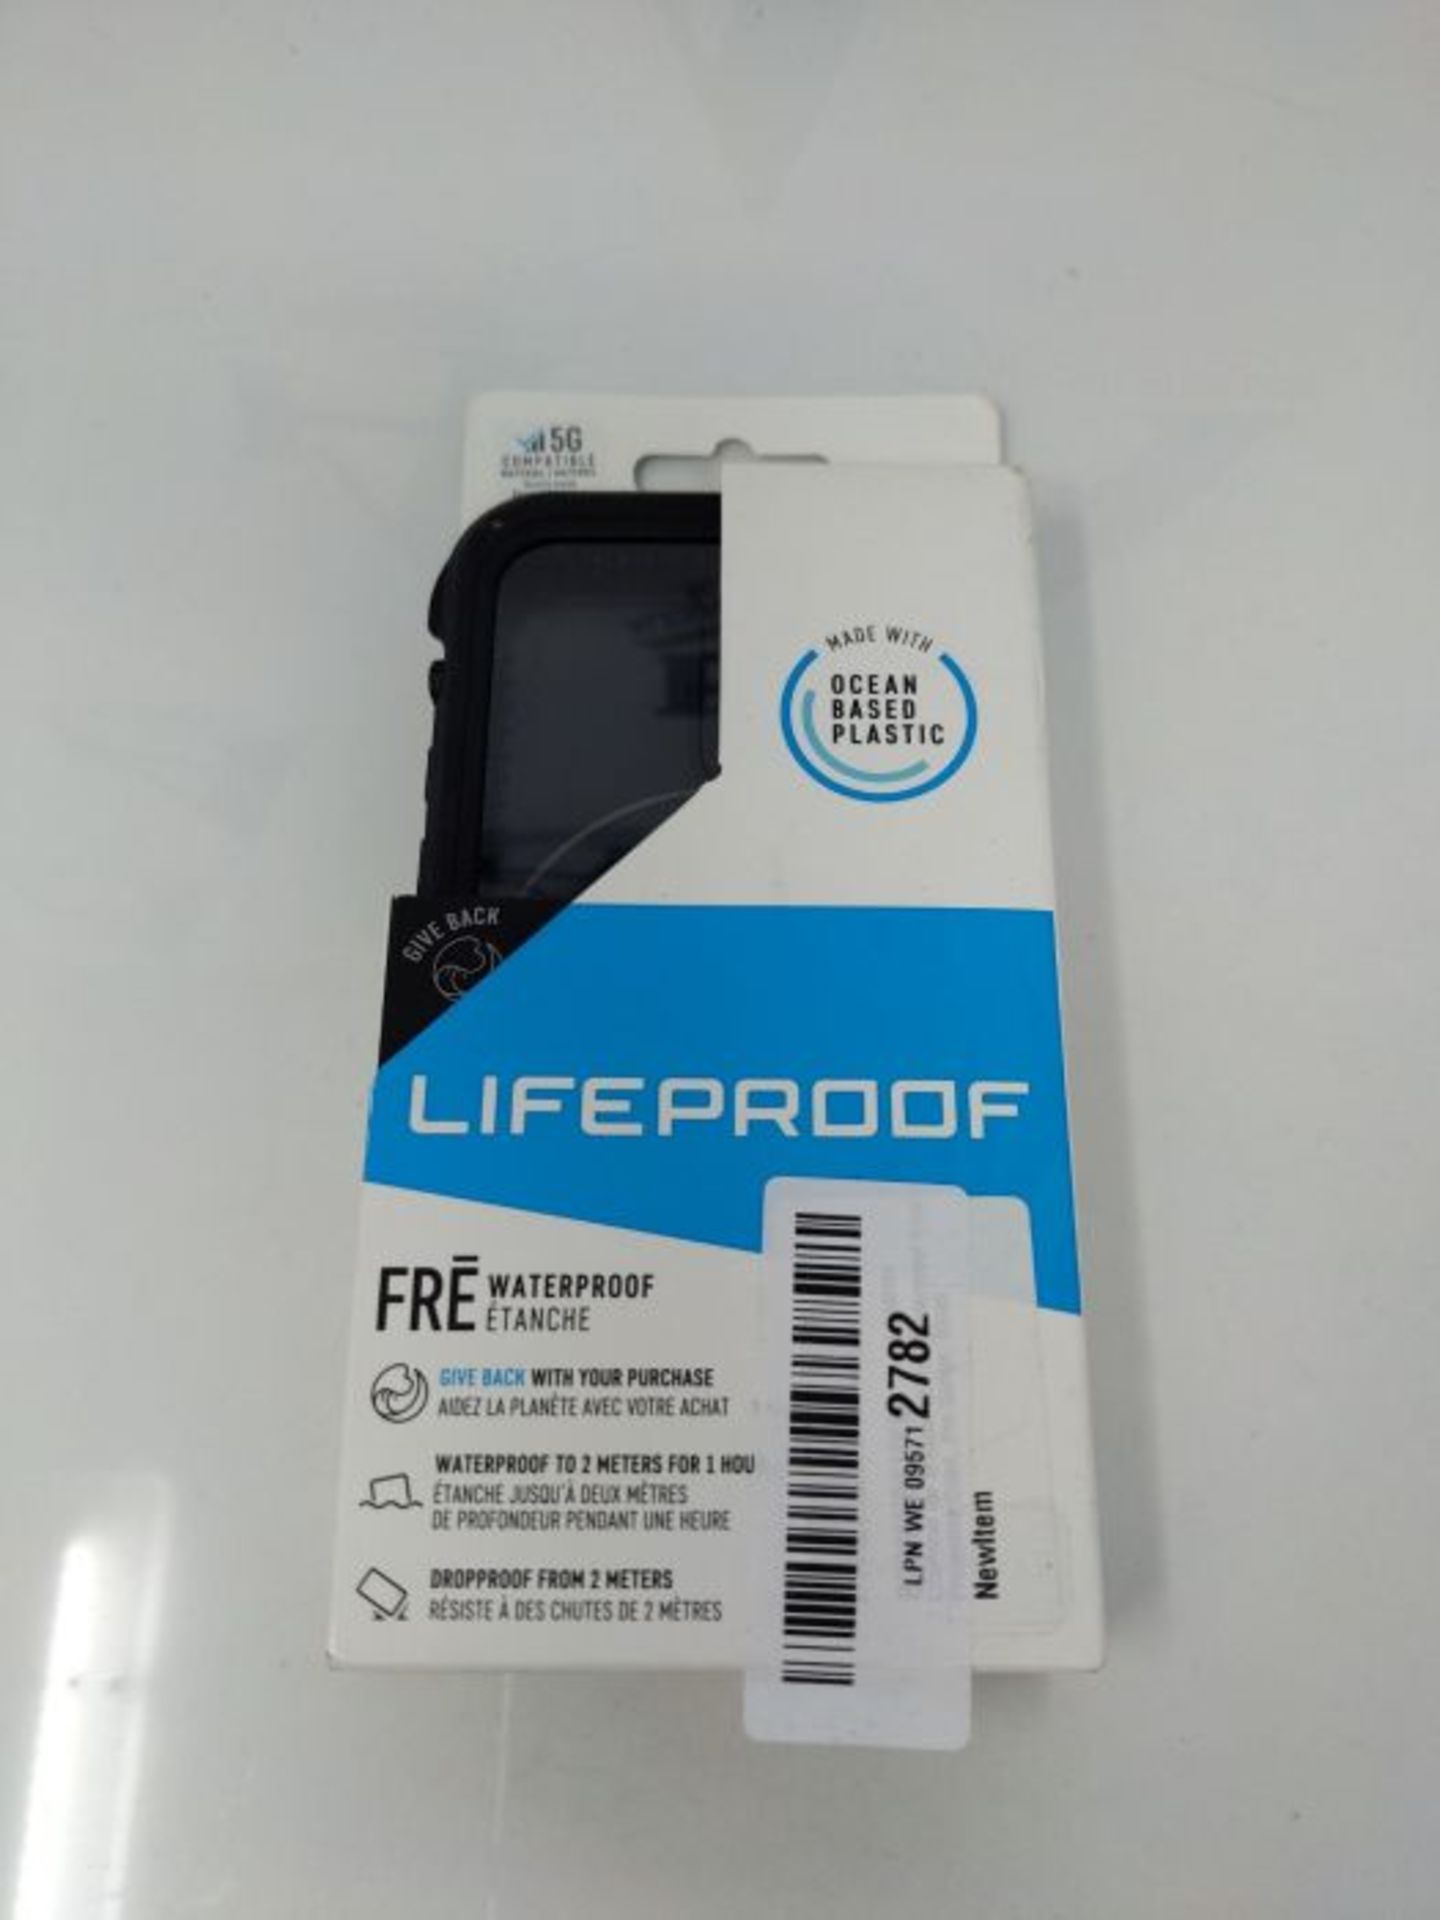 LifeProof for iPhone 12 Pro, Waterproof Drop Protective Case, Fre Series, Black - Image 2 of 6